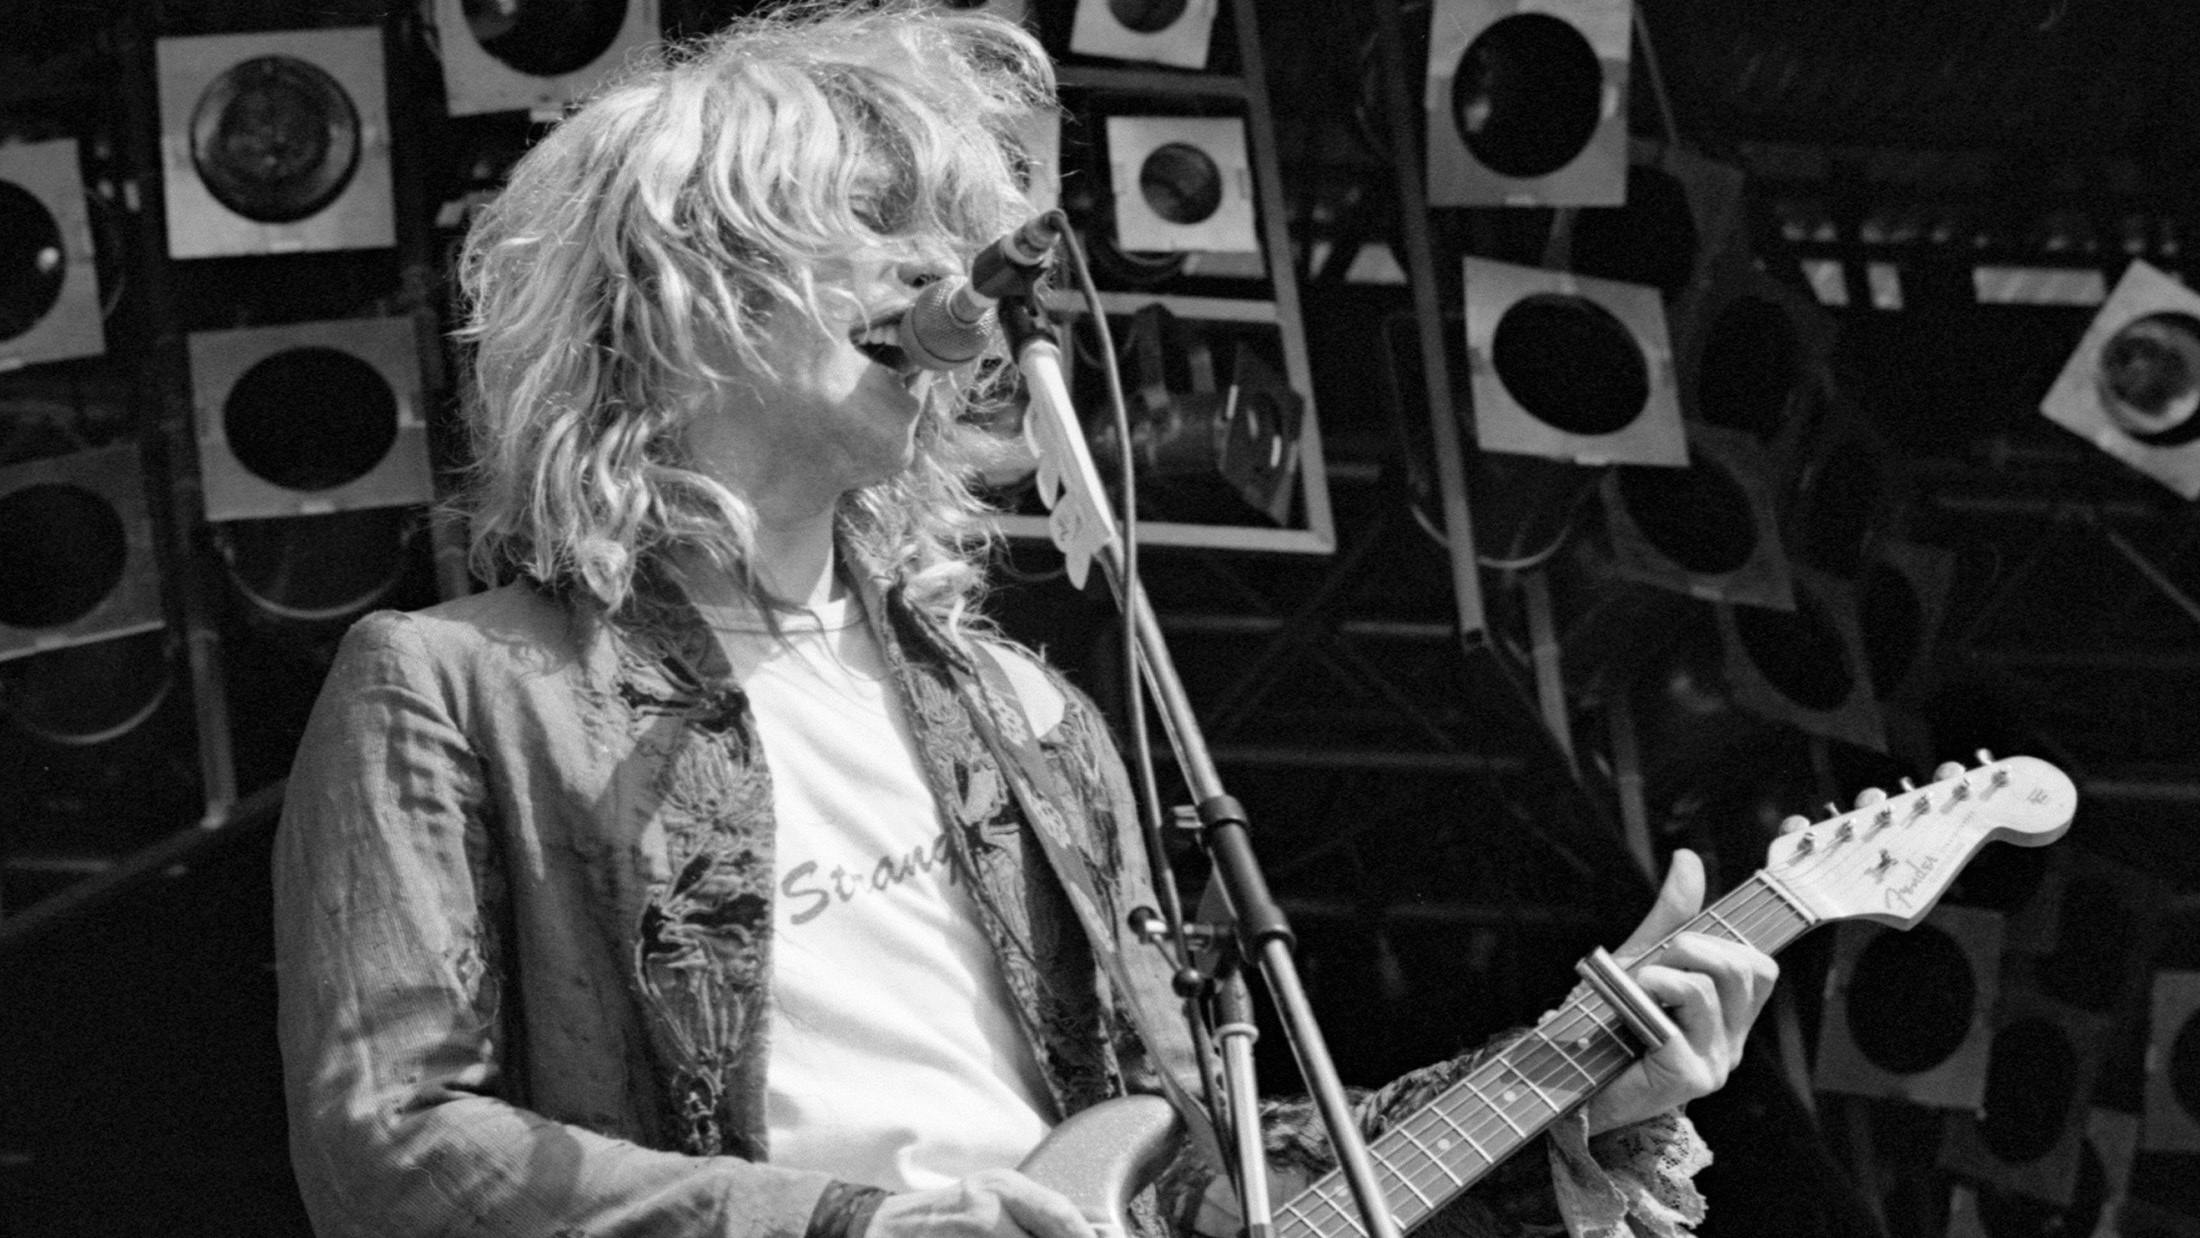 Ozzy Osbourne Pays Tribute To Bernie Tormé: "A Gentle Soul With A Heart Of Gold"